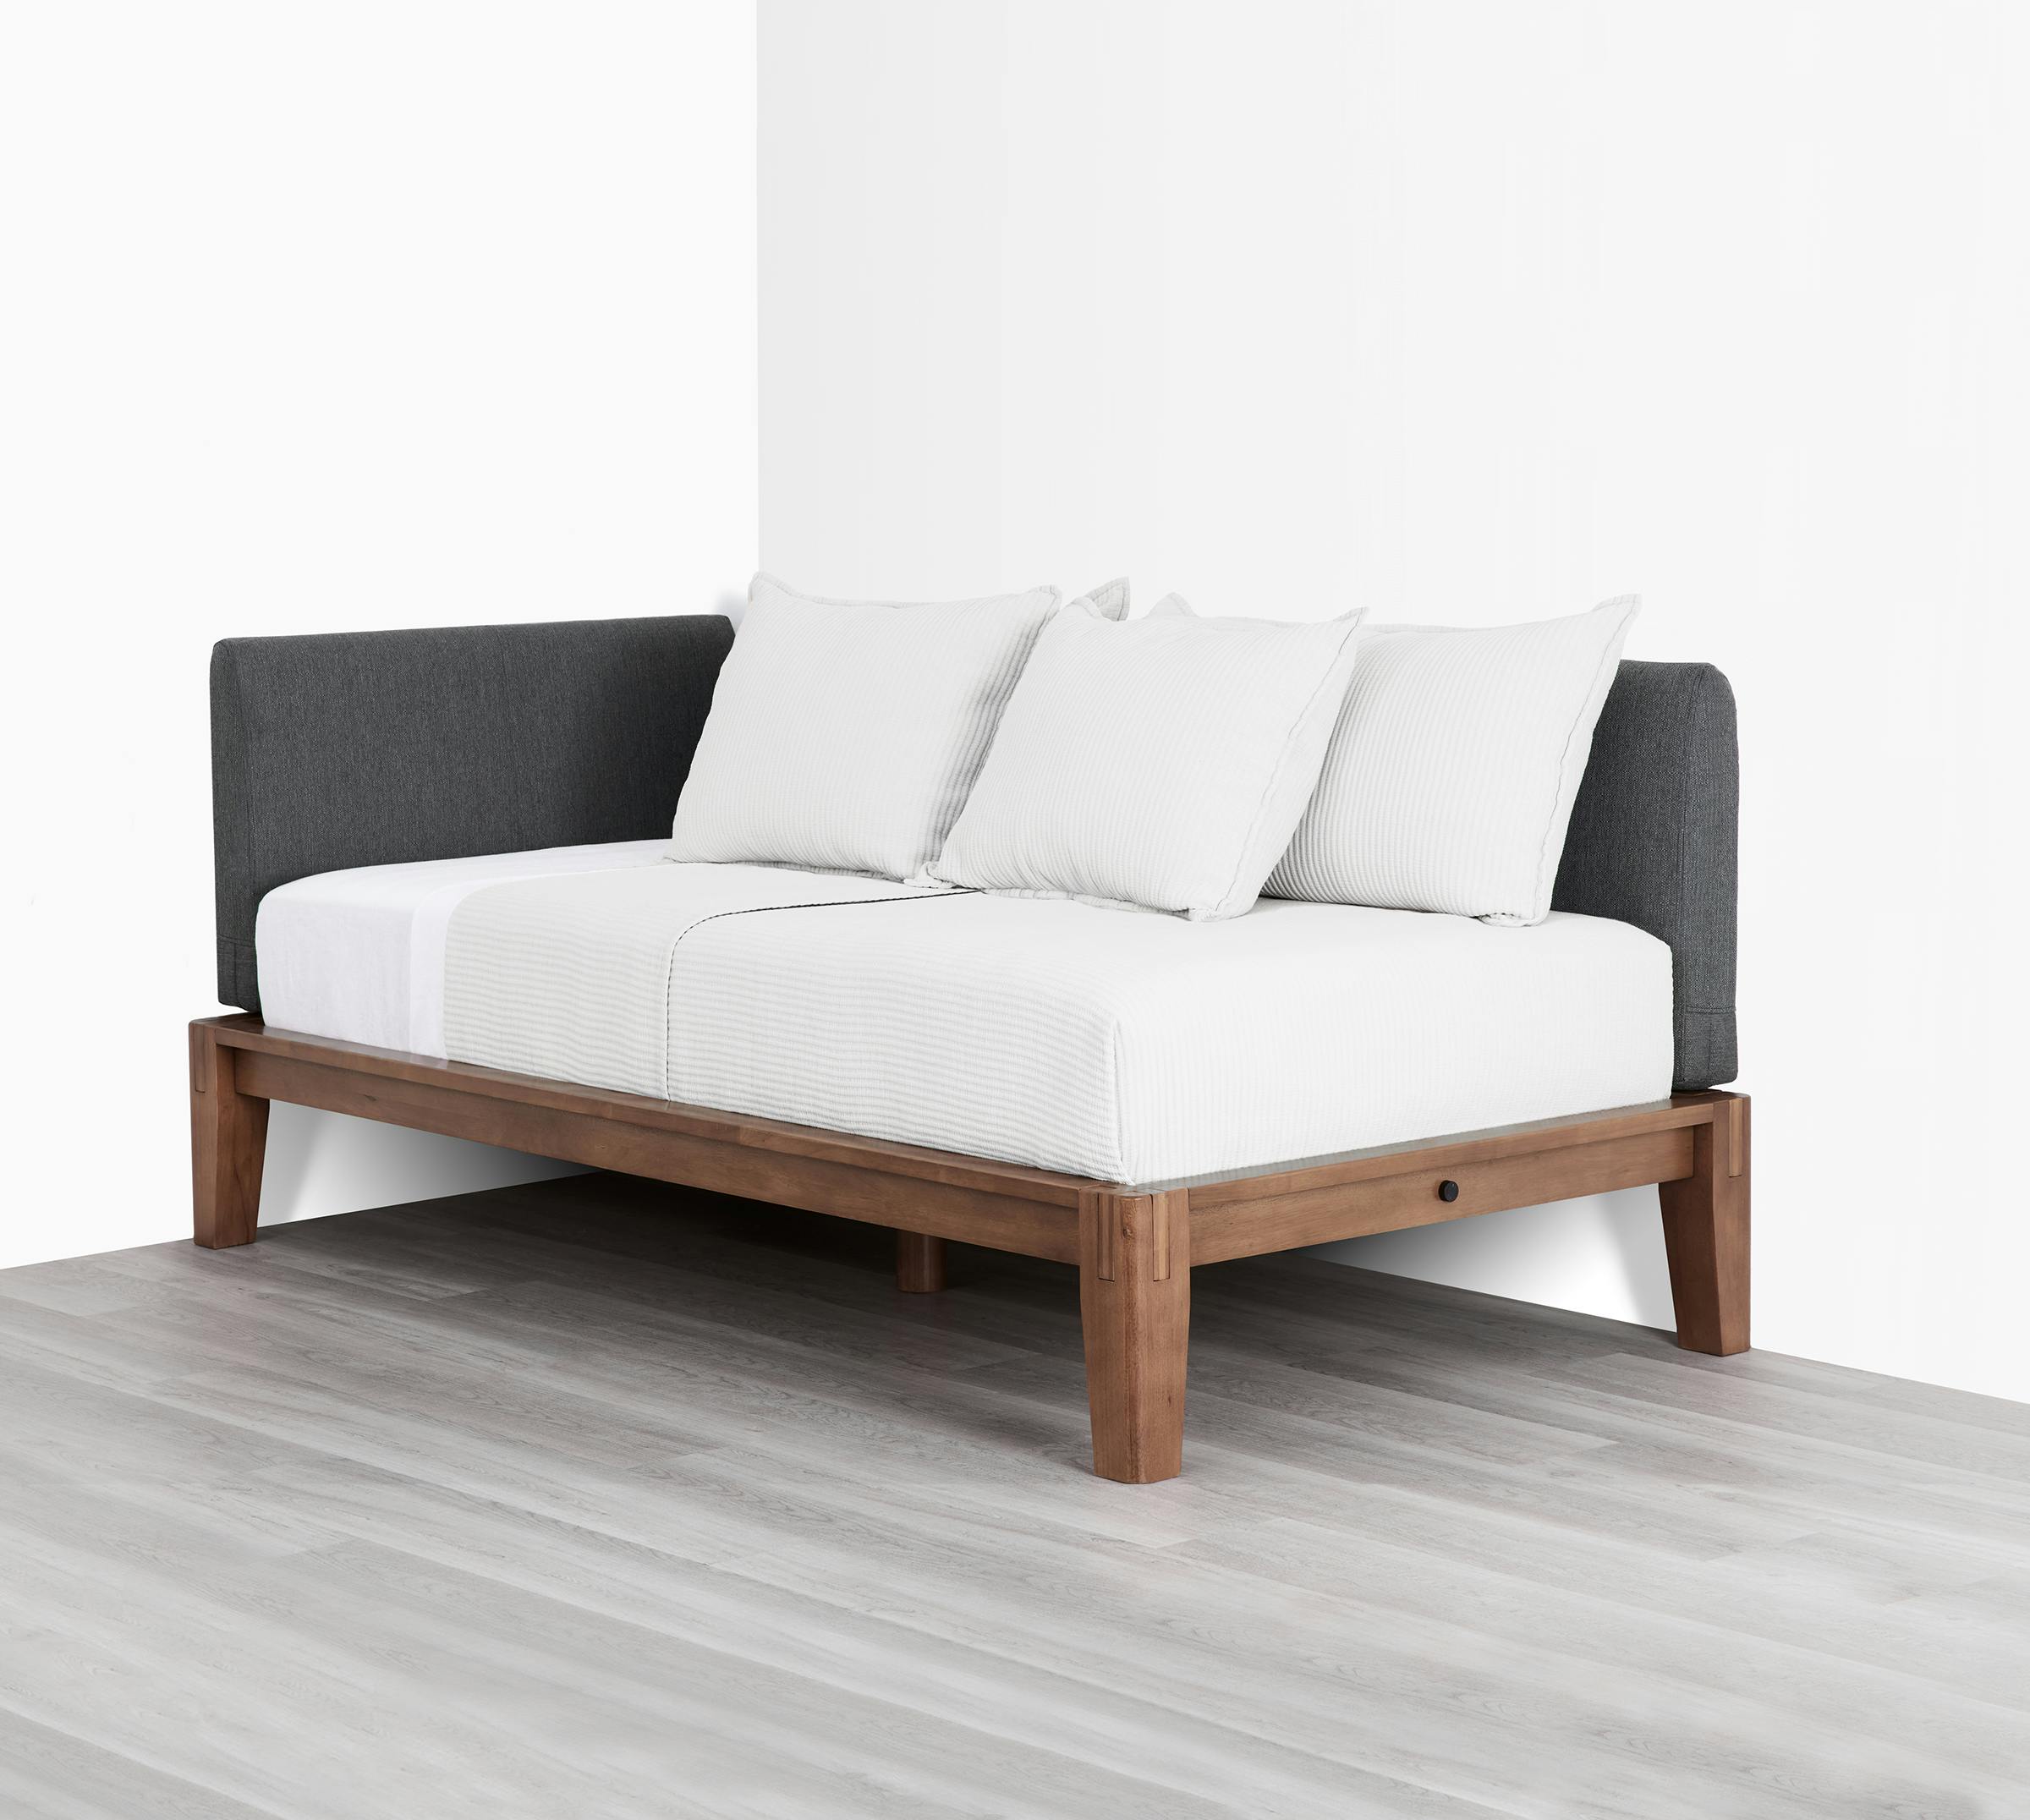 The Bed (Daybed / Walnut / Dark Charcoal) - Diagonal 3